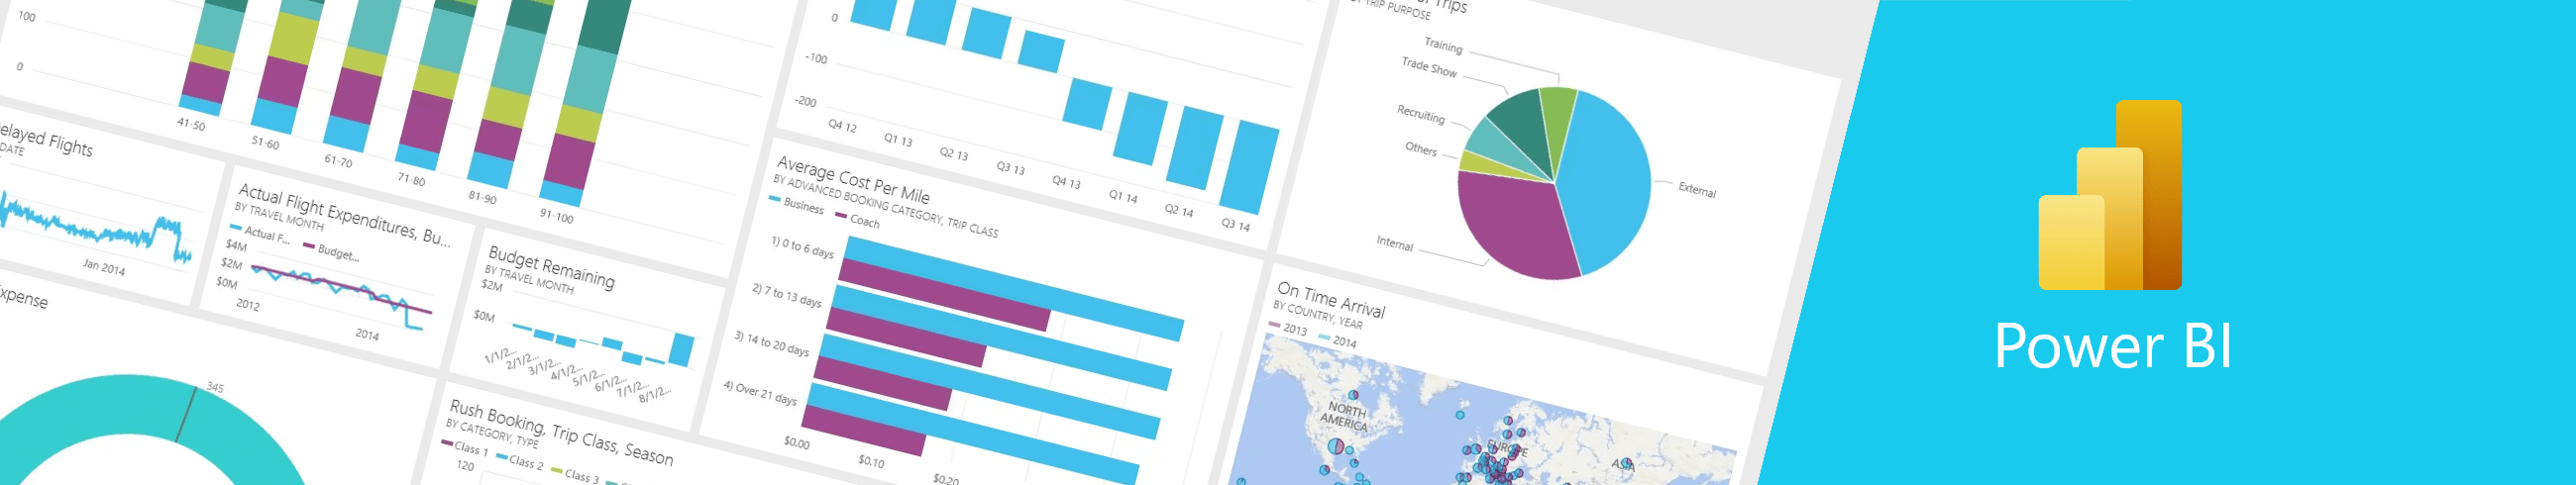 Intro to Power BI and what it can do for your business - baseMSP